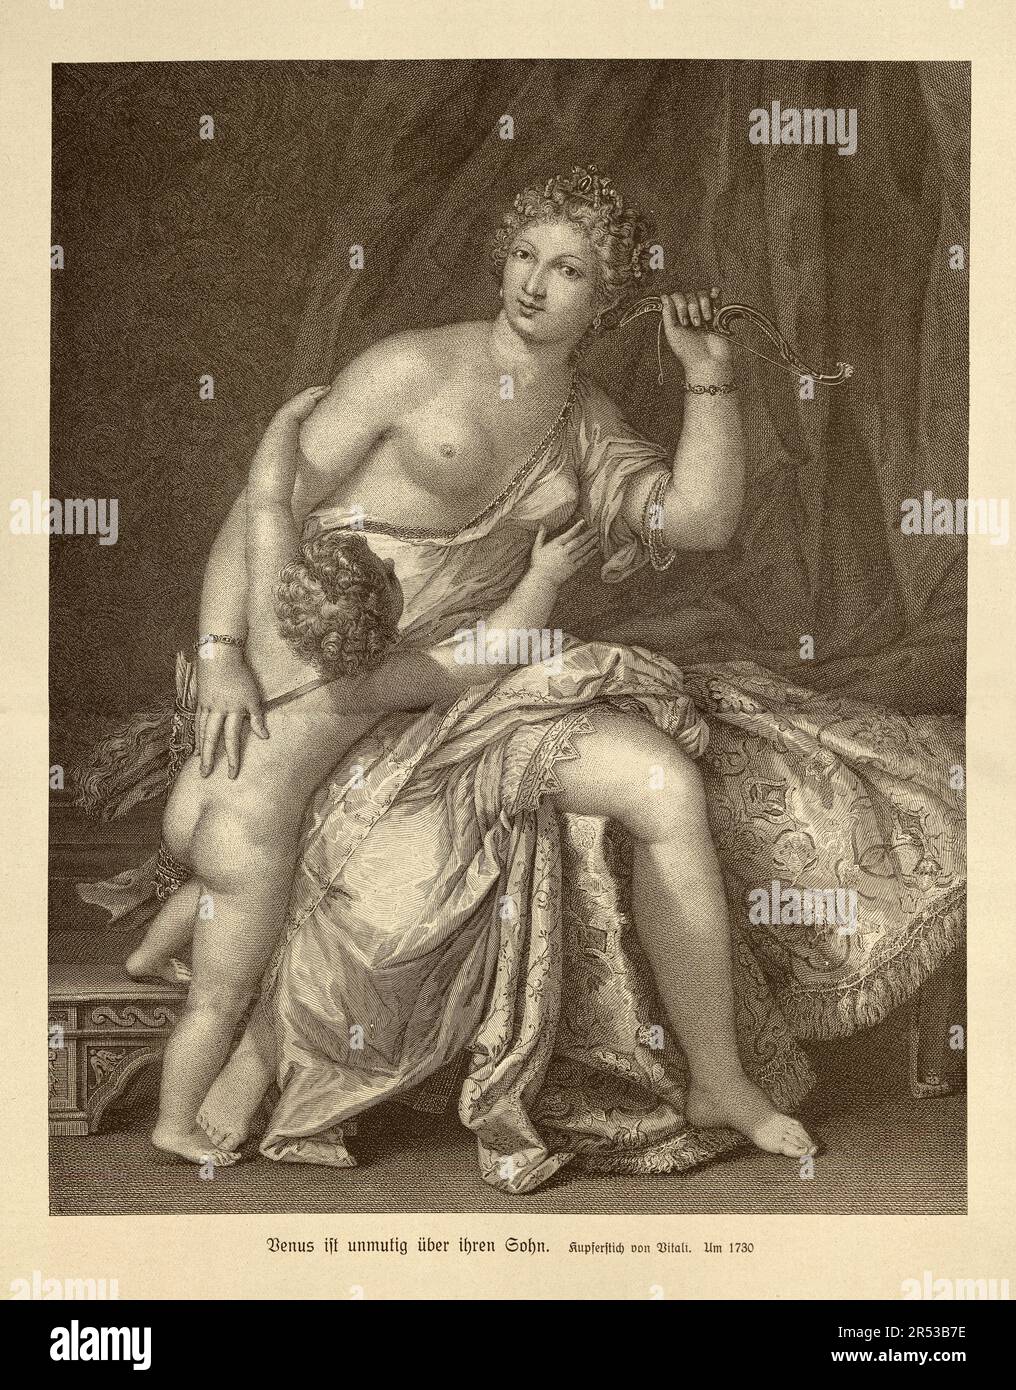 Venus disarming Cupid, Goddess sitting on a bed holding a bow aloft, and Cupid trying to reach the weapon, 18th Century engraving Stock Photo